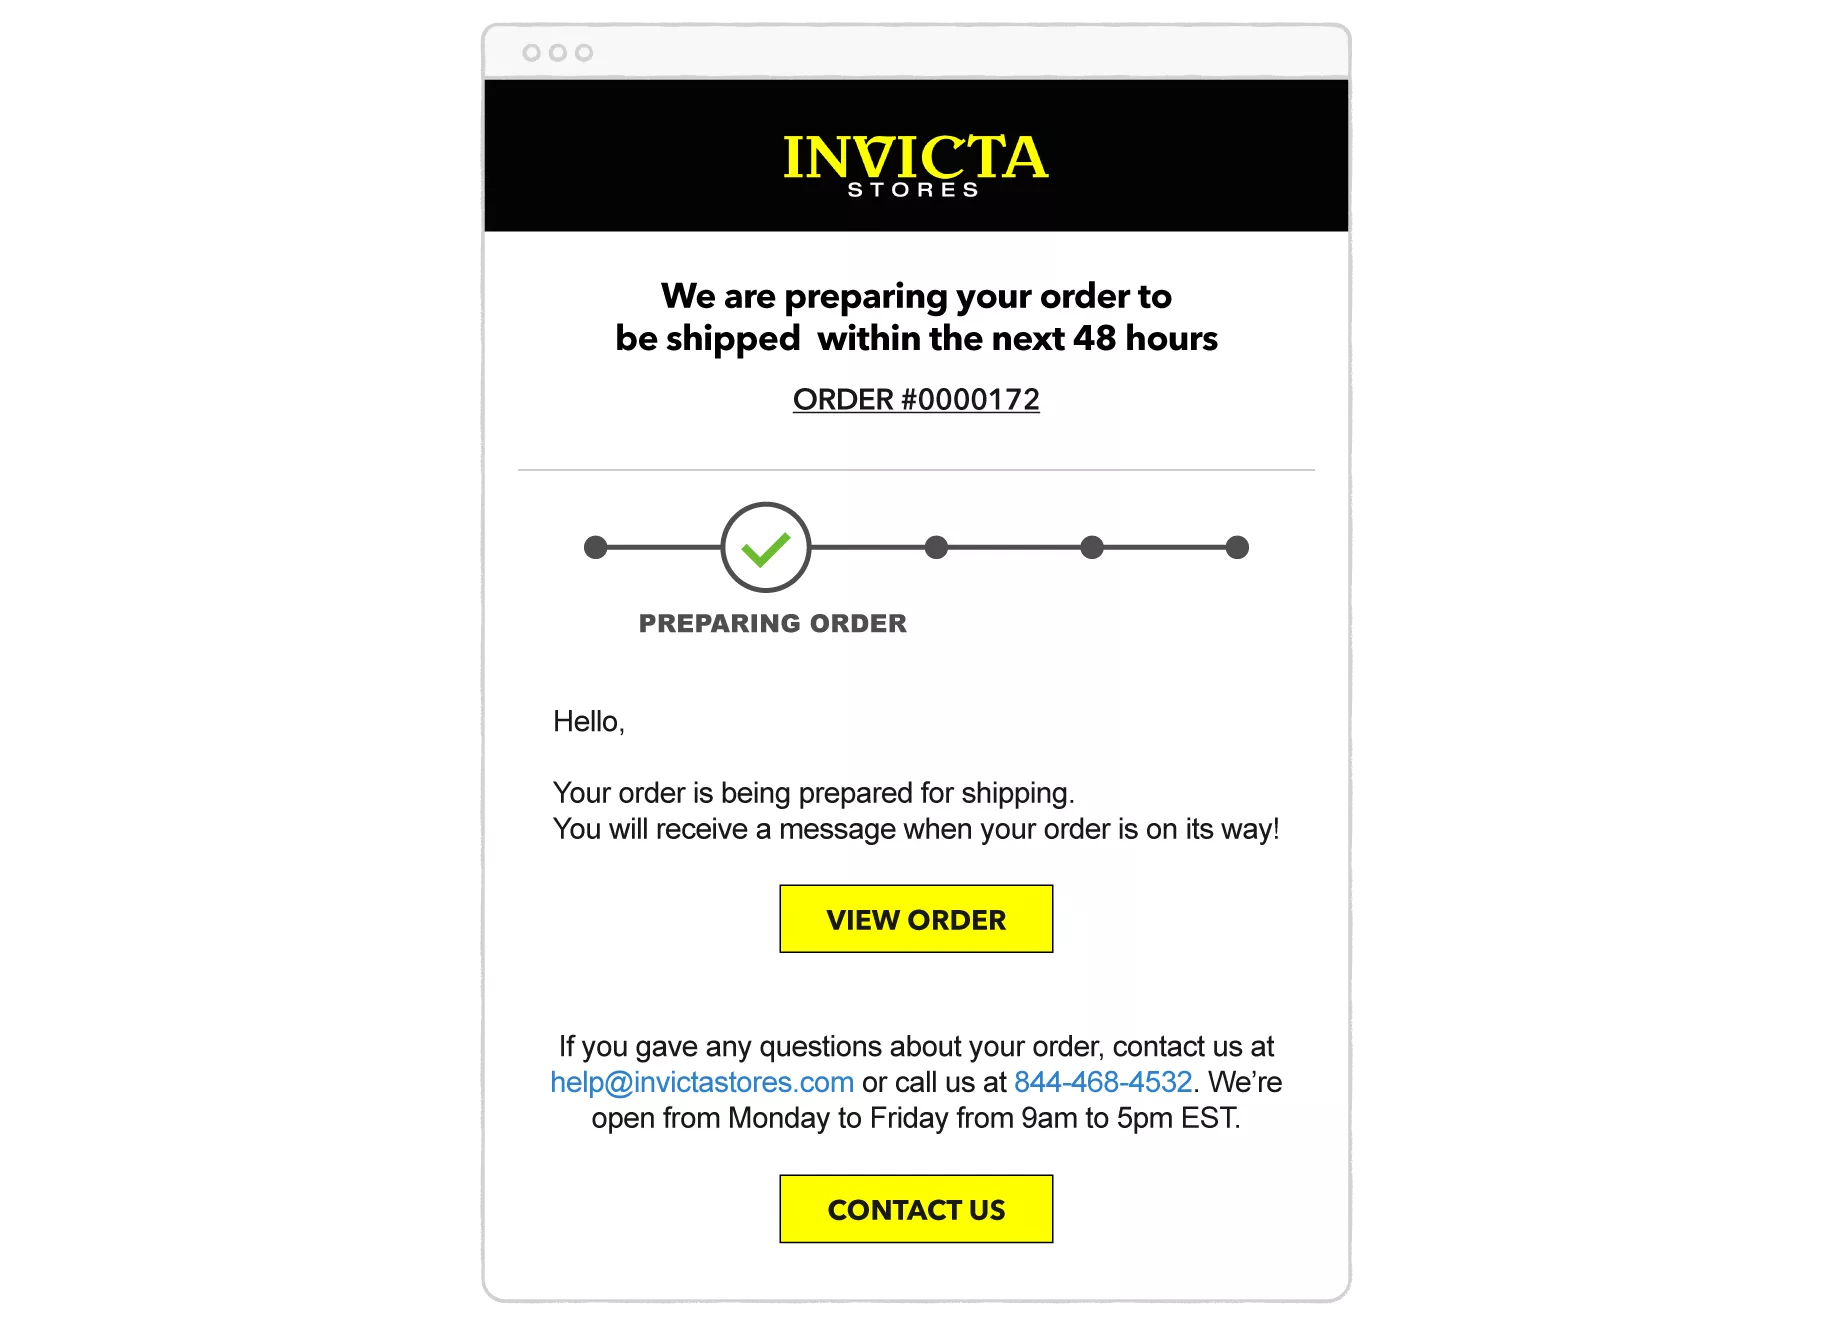 wesupply invicta watches stores order notification